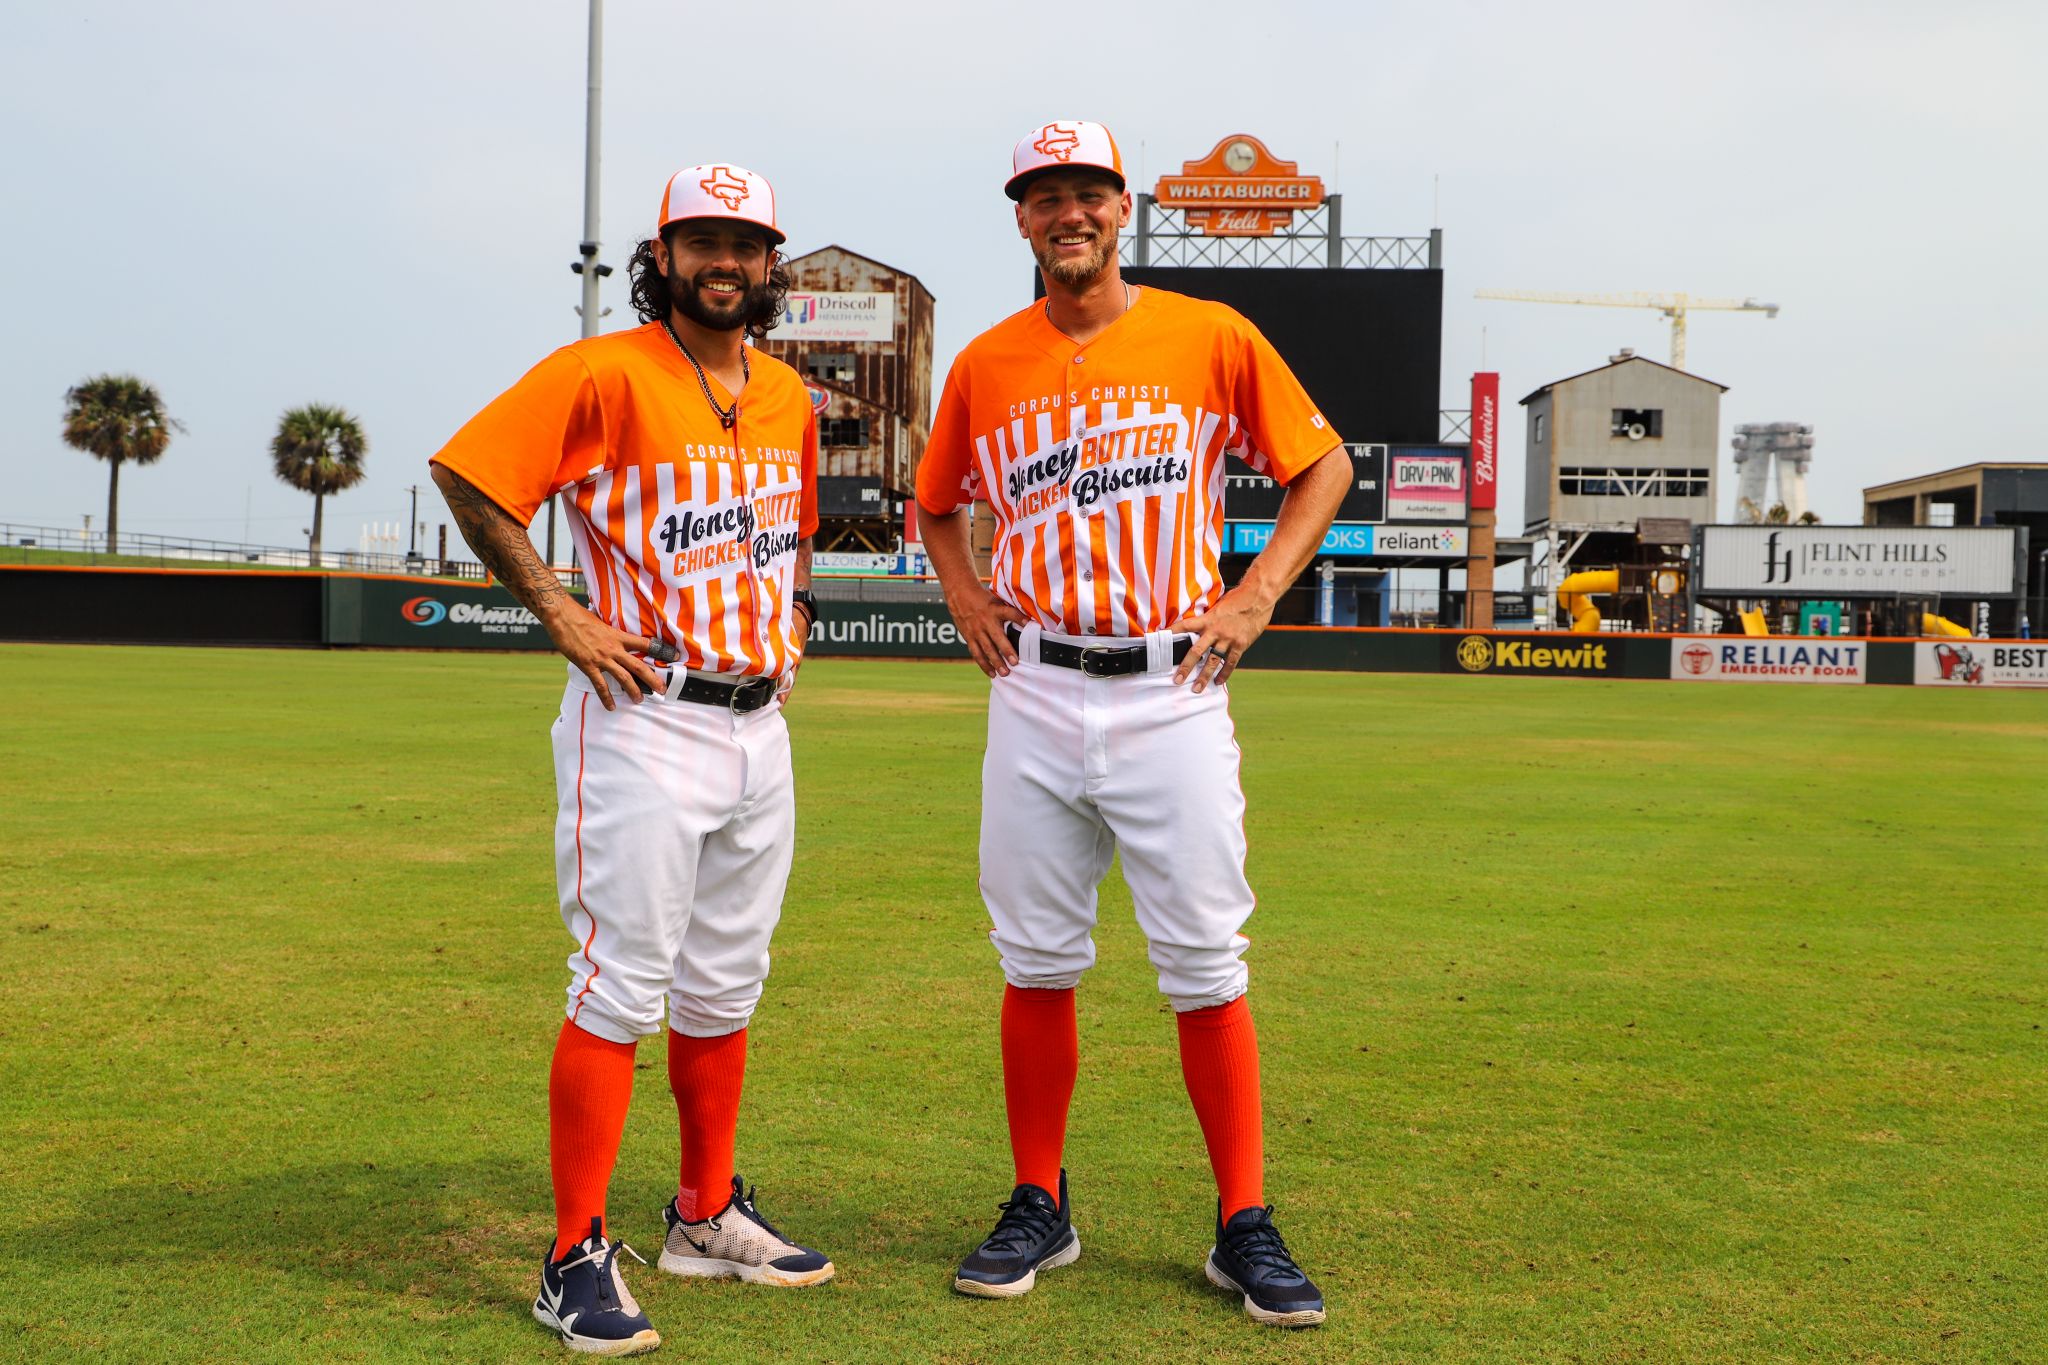 Corpus Christi Hooks on X: Introducing the Honey Butter Chicken Biscuits!  🟠⚪️ Each Wednesday during the 2021 season, the Hooks will wear this  eye-catching, mouth-watering look inspired by @Whataburger's famed  orange-and-white strip